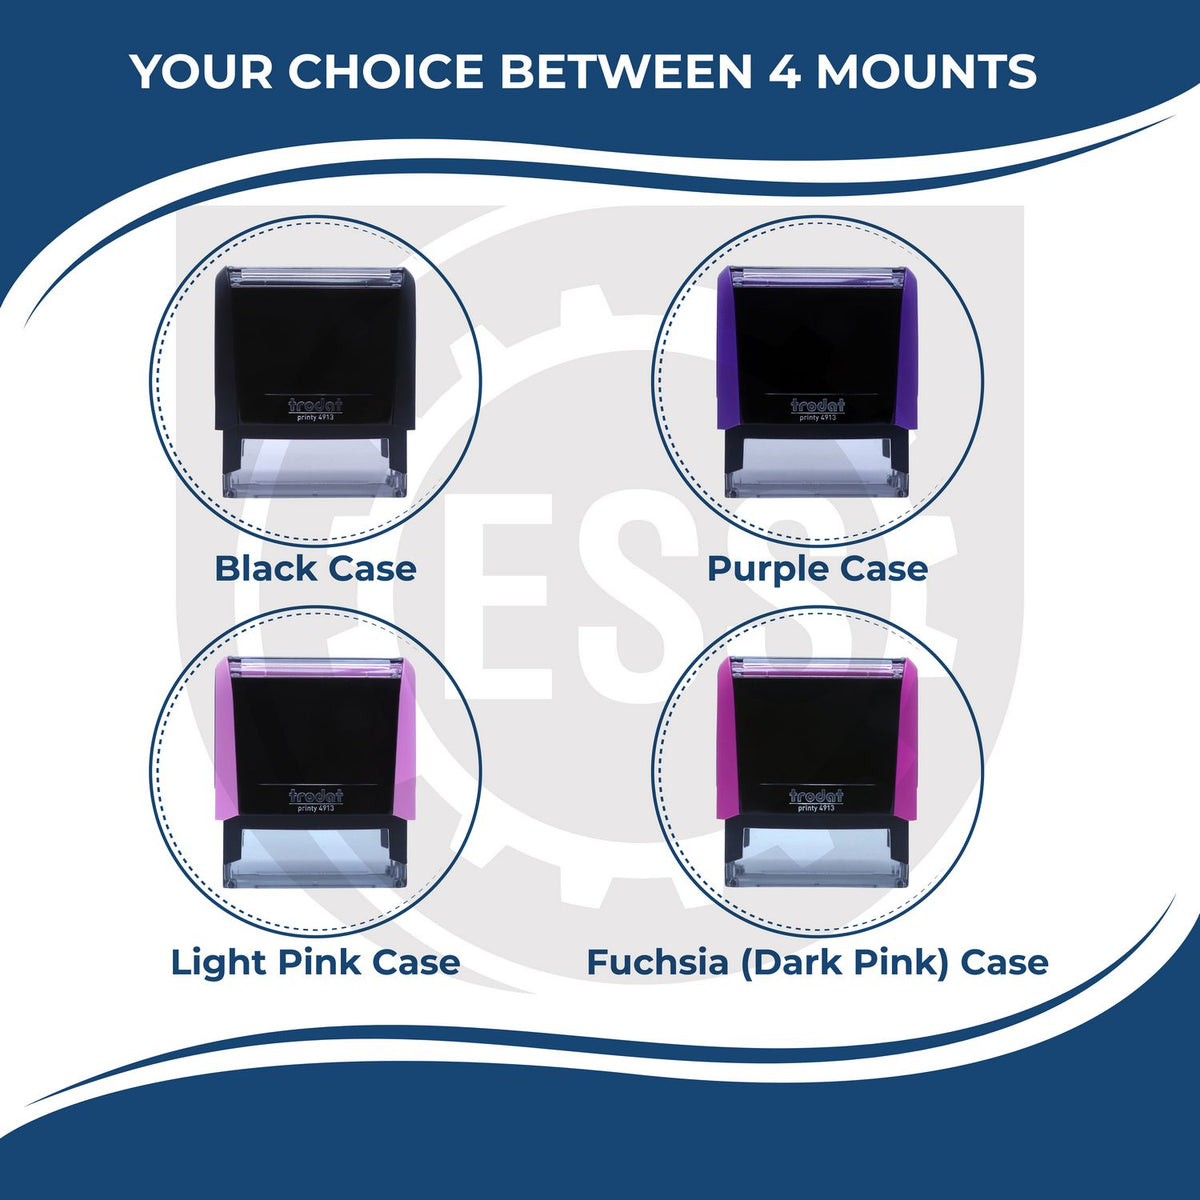 A picture of different colored mounts for the Self-Inking Rectangular Indiana Notary Stamp featurning a Red, Blue or Black Mount